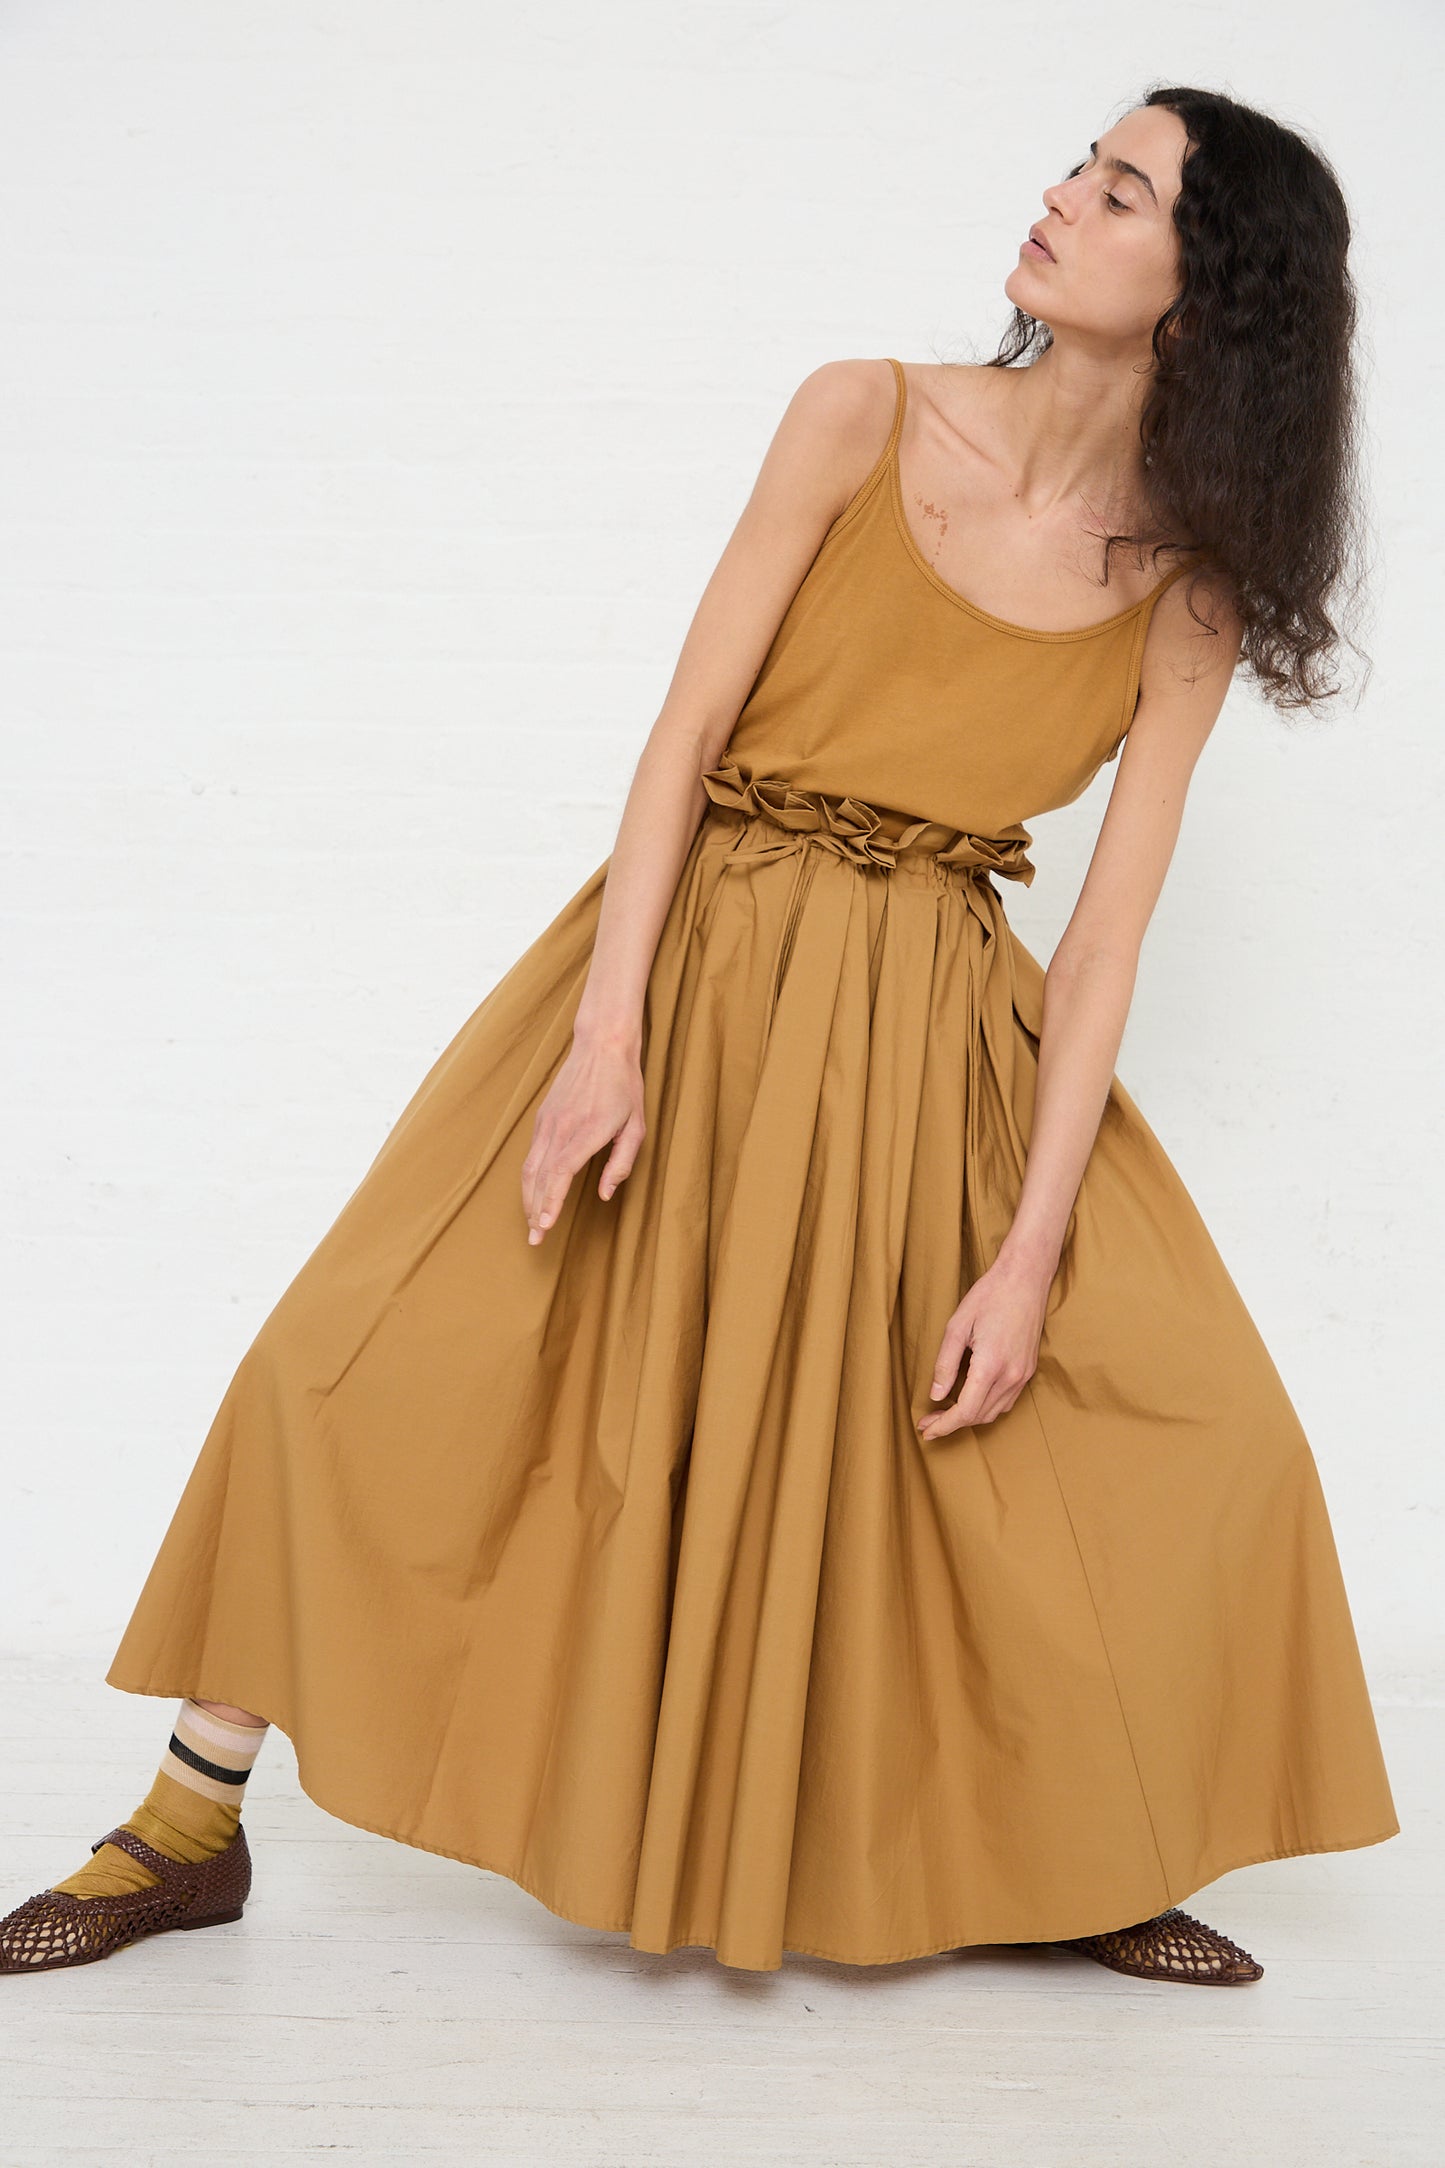 A woman in a Cotton Parachute Skirt in Camel by Black Crane featuring a braided belt poses against a white background.